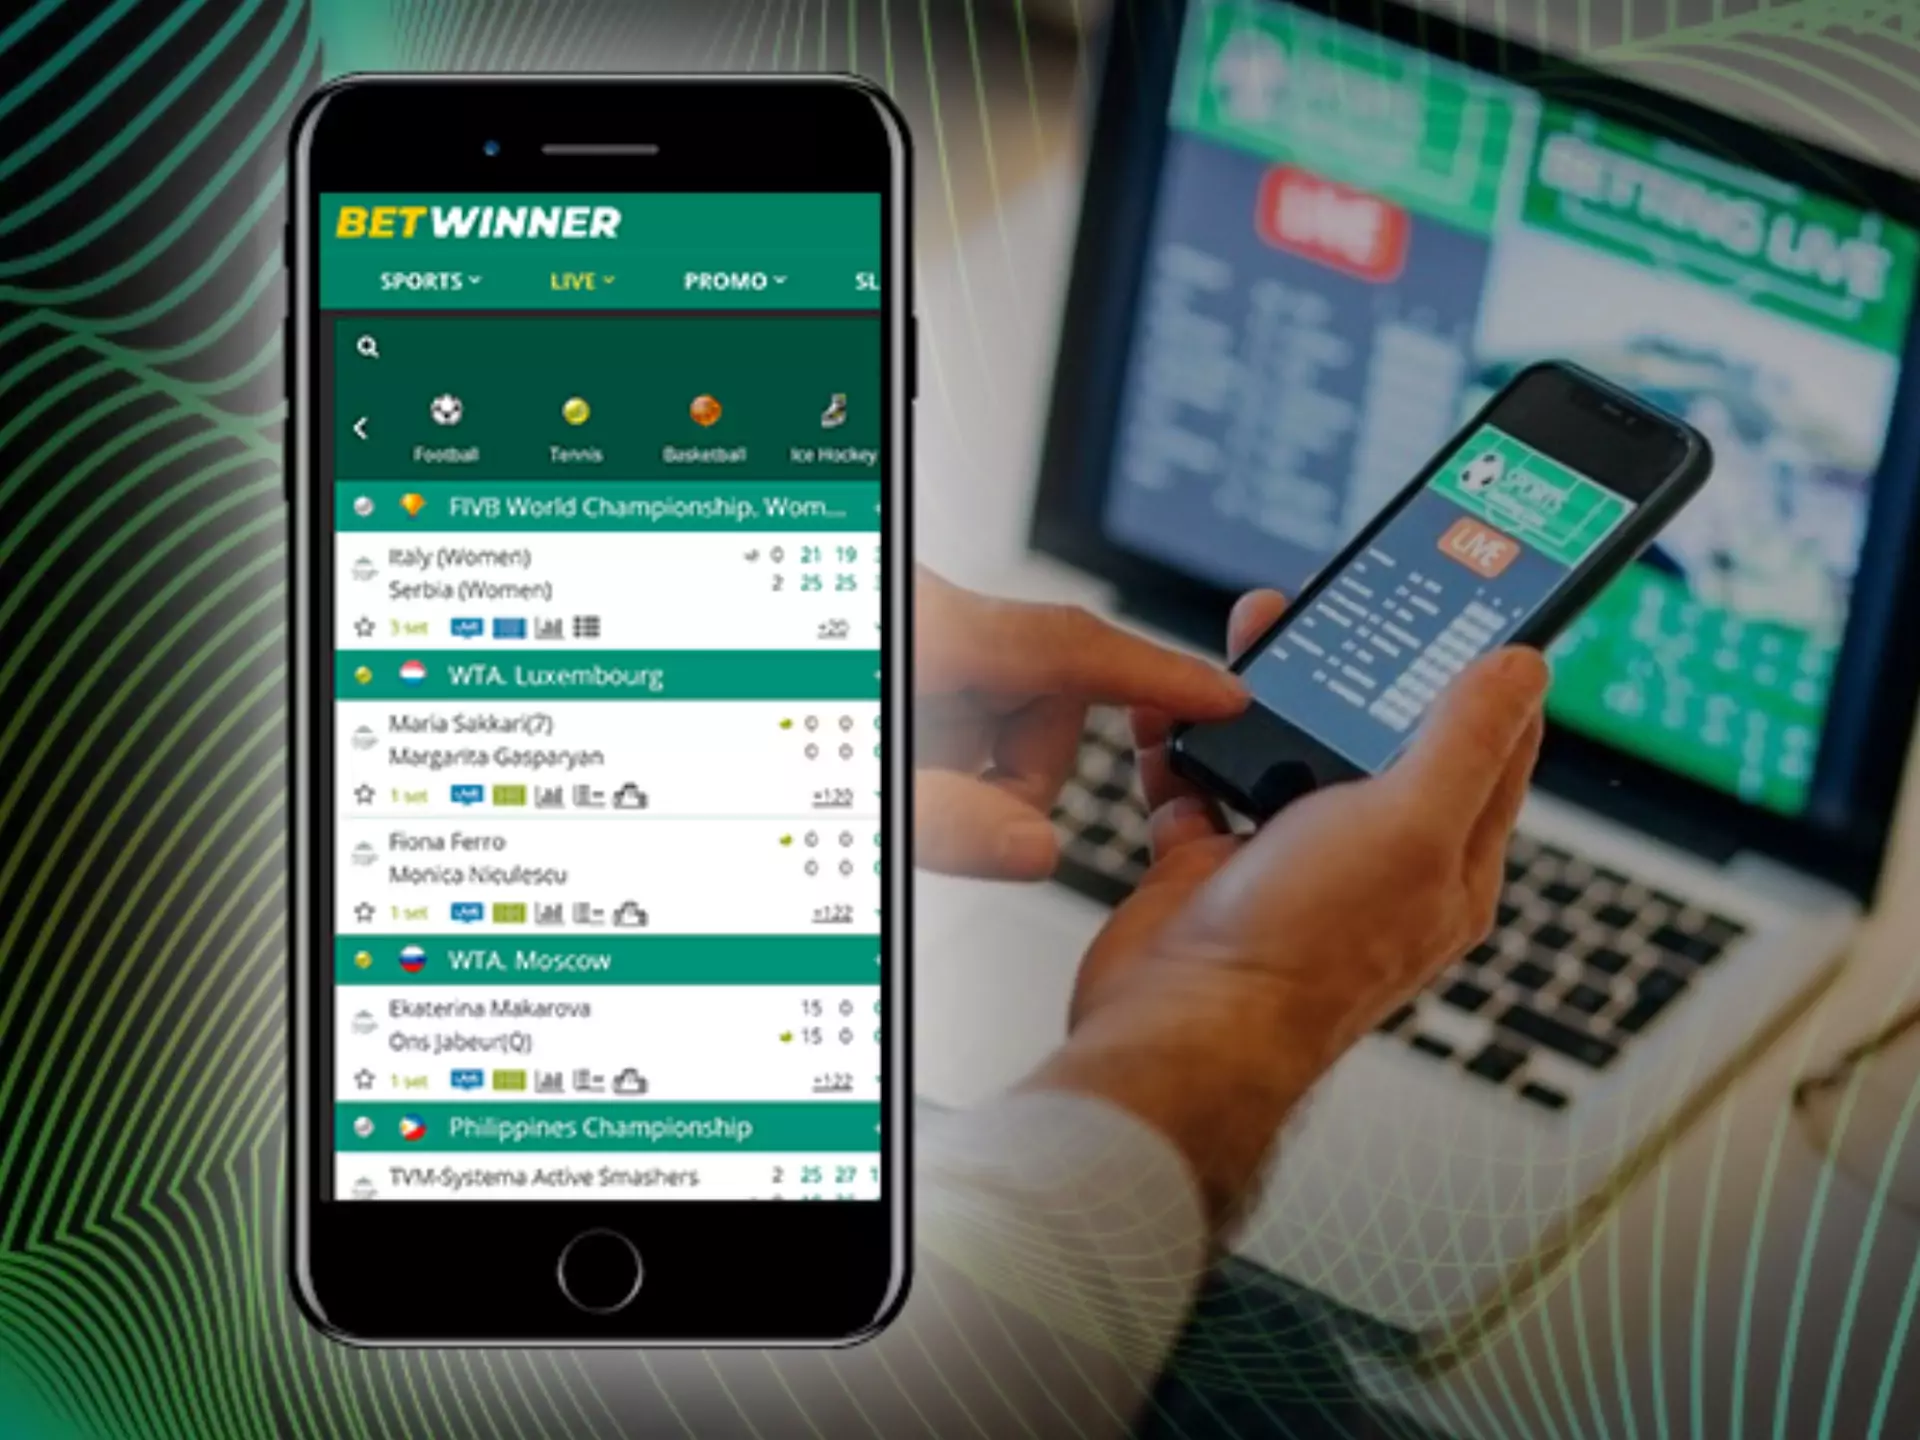 You can place bets on every sport at Betwinner via your Android or iOS phone.